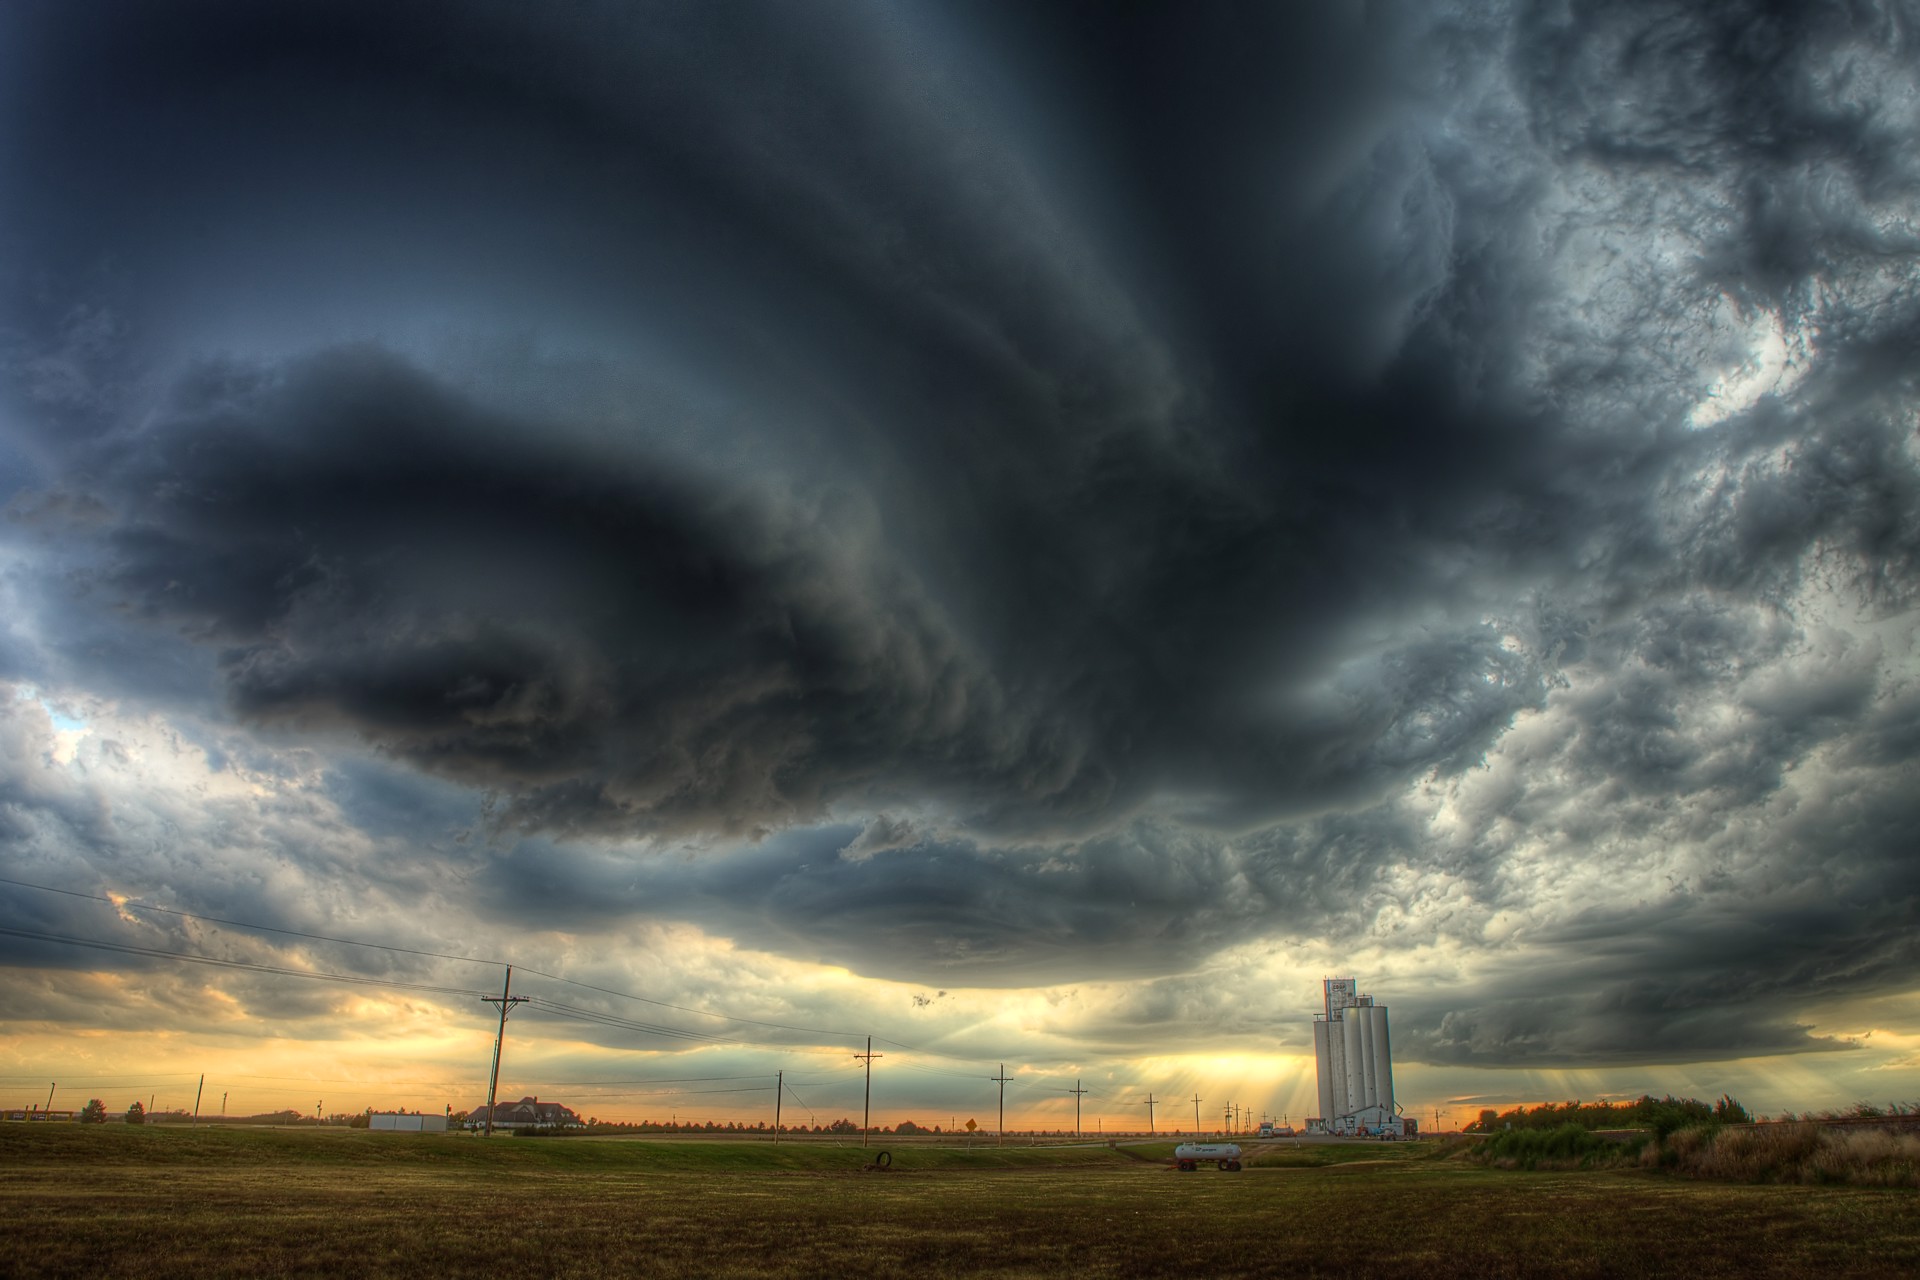 HDR Storm by Thomas Zimmerman